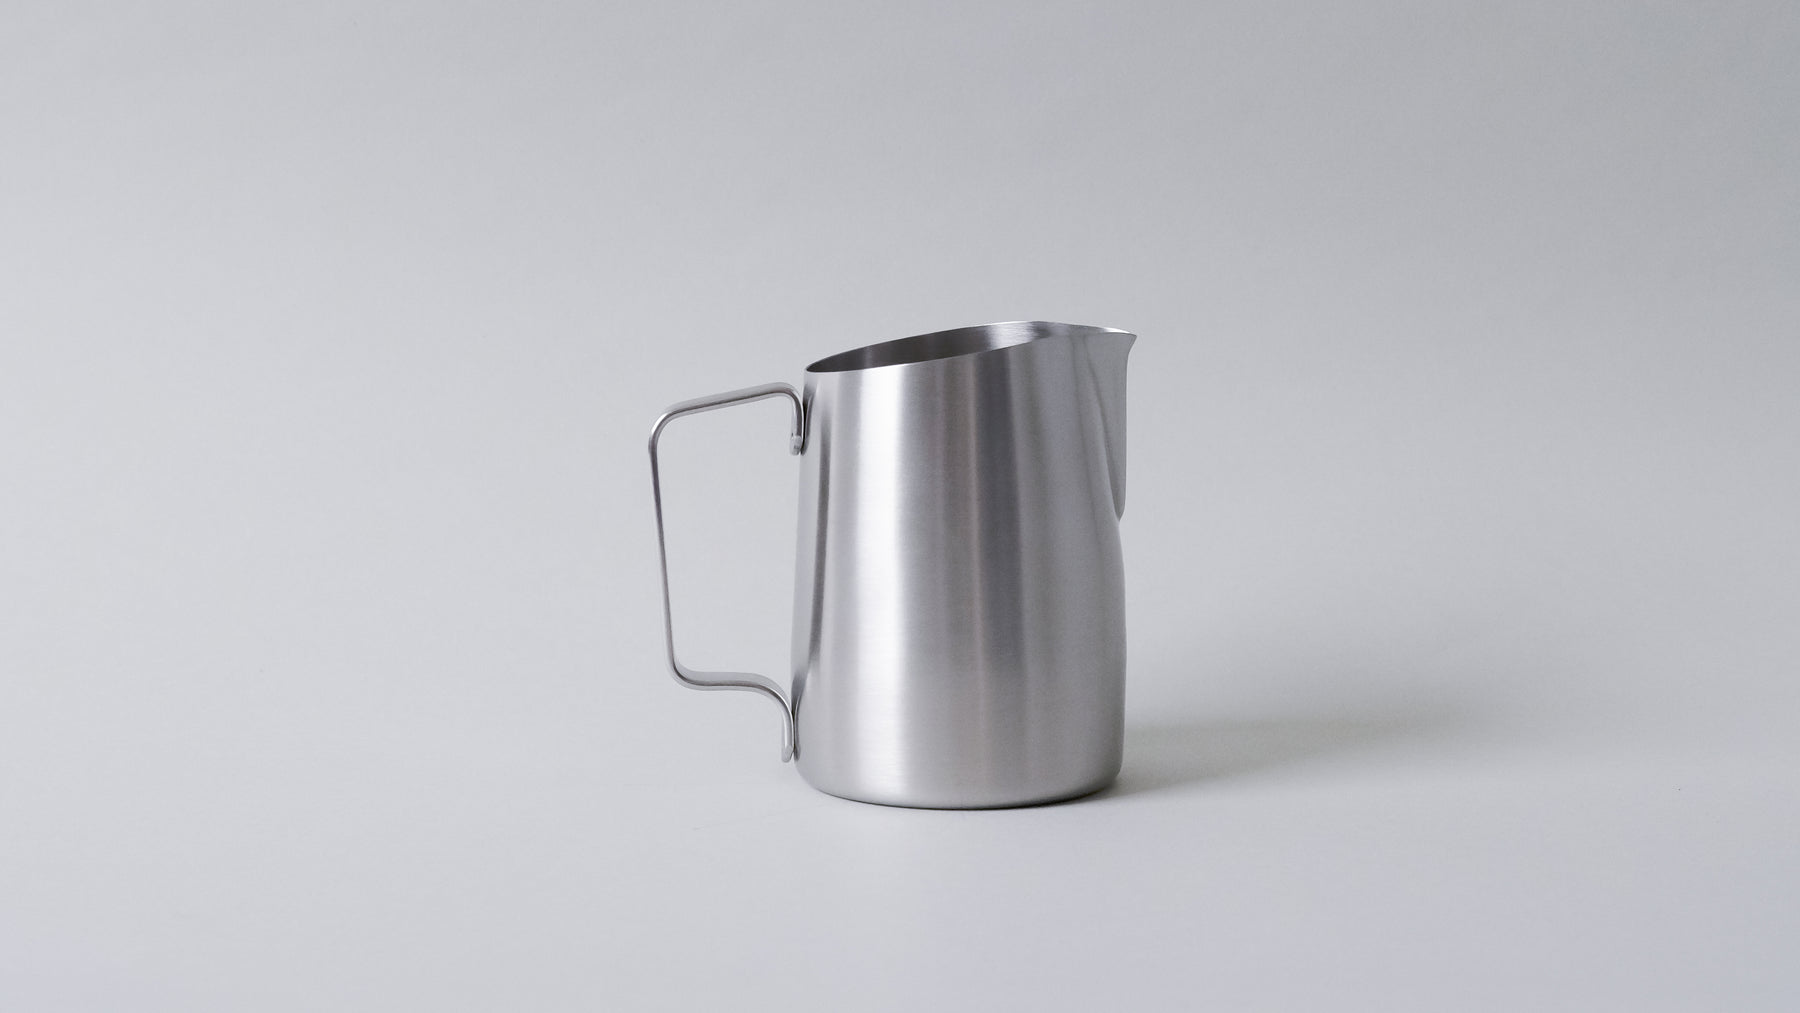 MILK Stainless Steel Frothing Pitcher - Narrow Spout